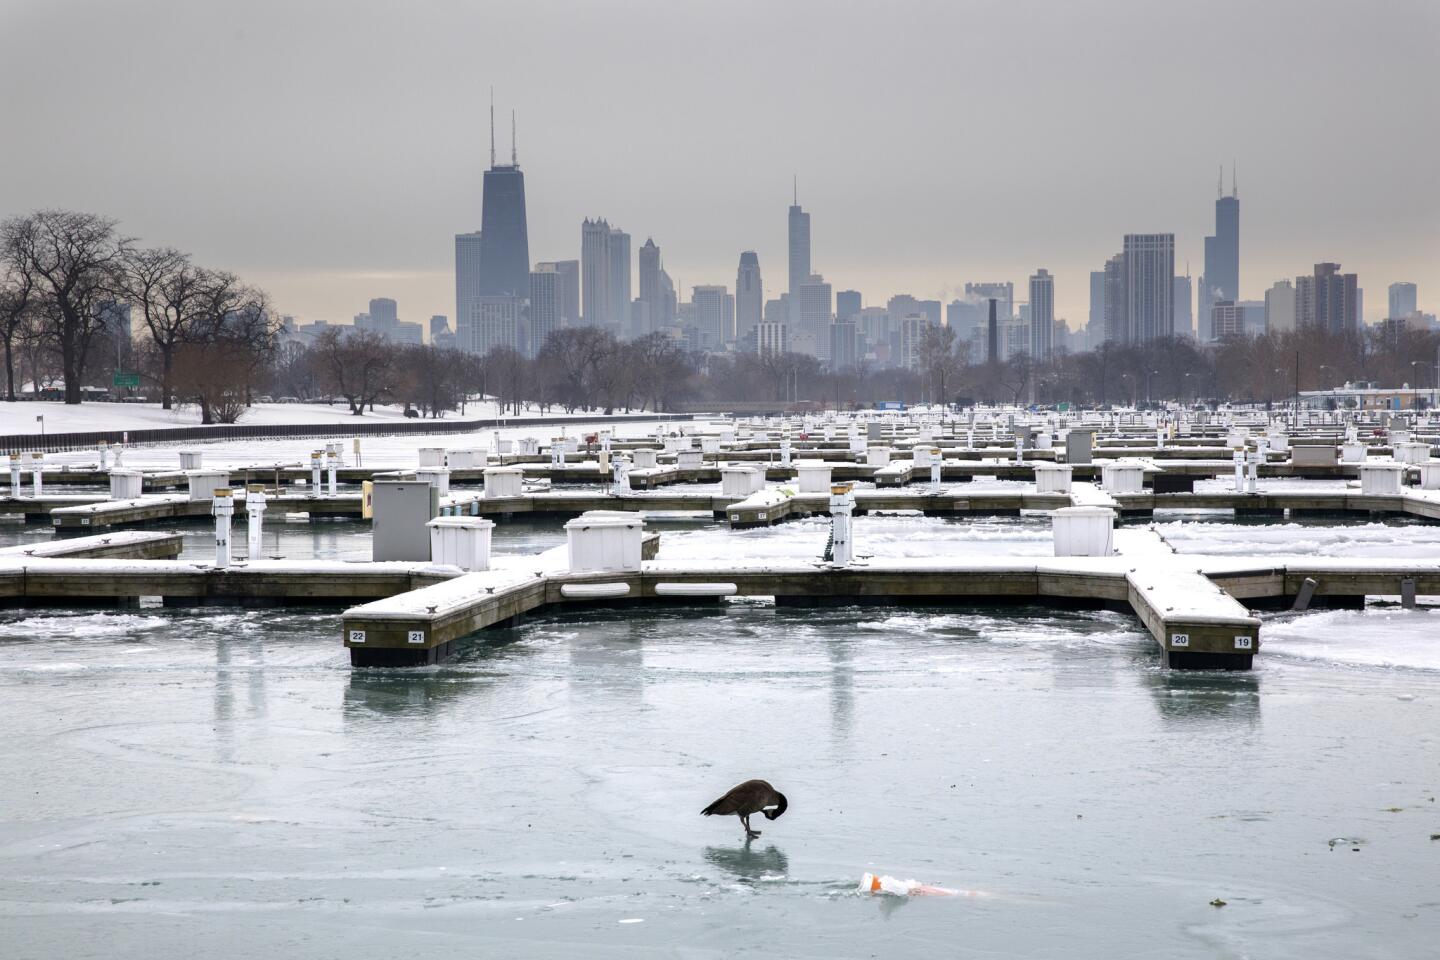 Diversy Harbor is devoid of boats and covered in ice Dec. 21, 2016, in Chicago on the winter solstice.